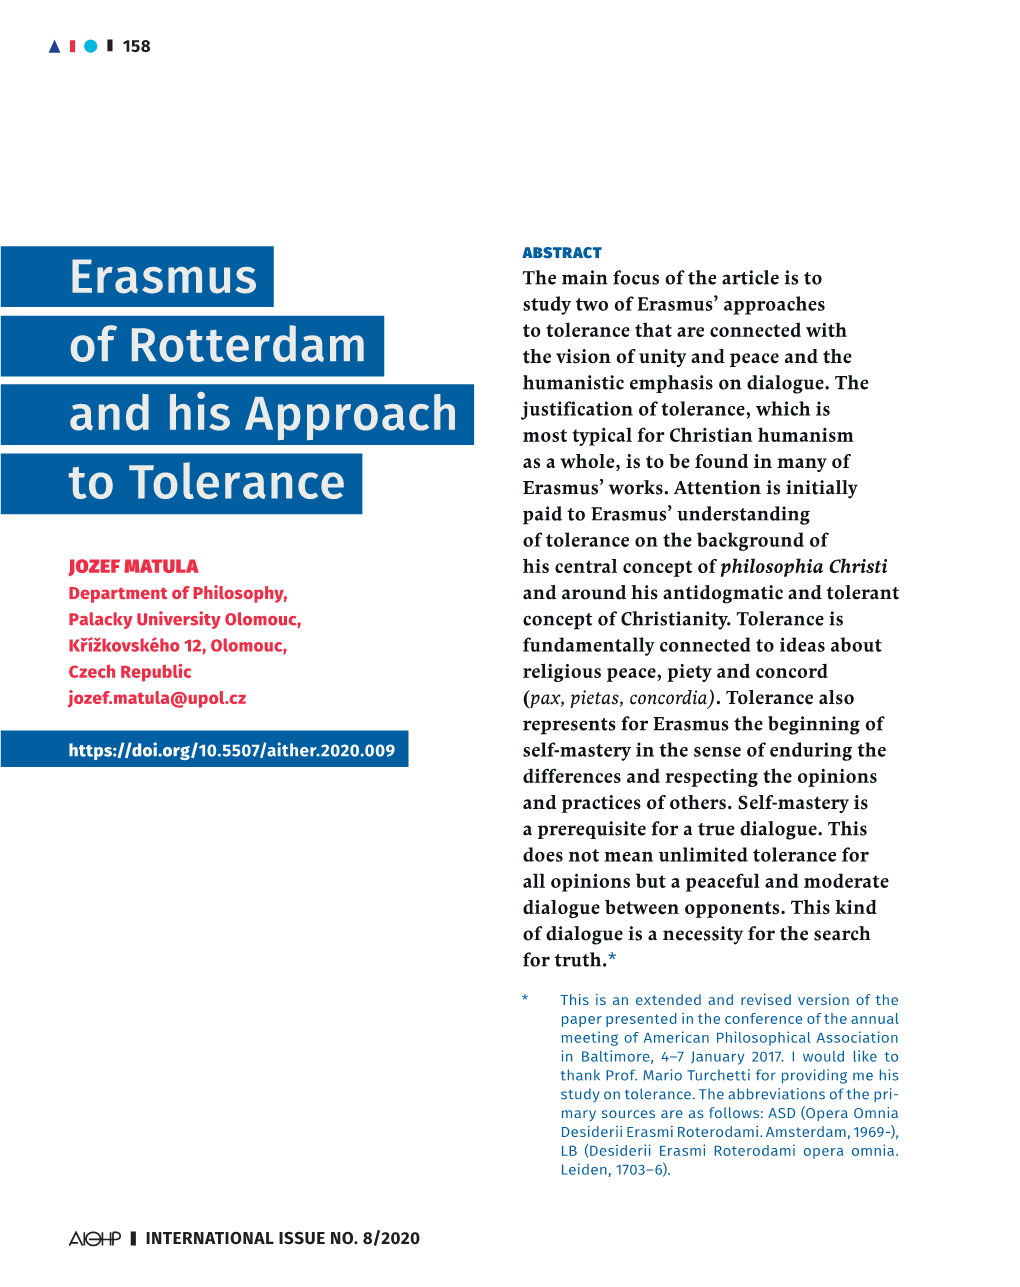 Erasmus of Rotterdam and His Approach to Tolerance